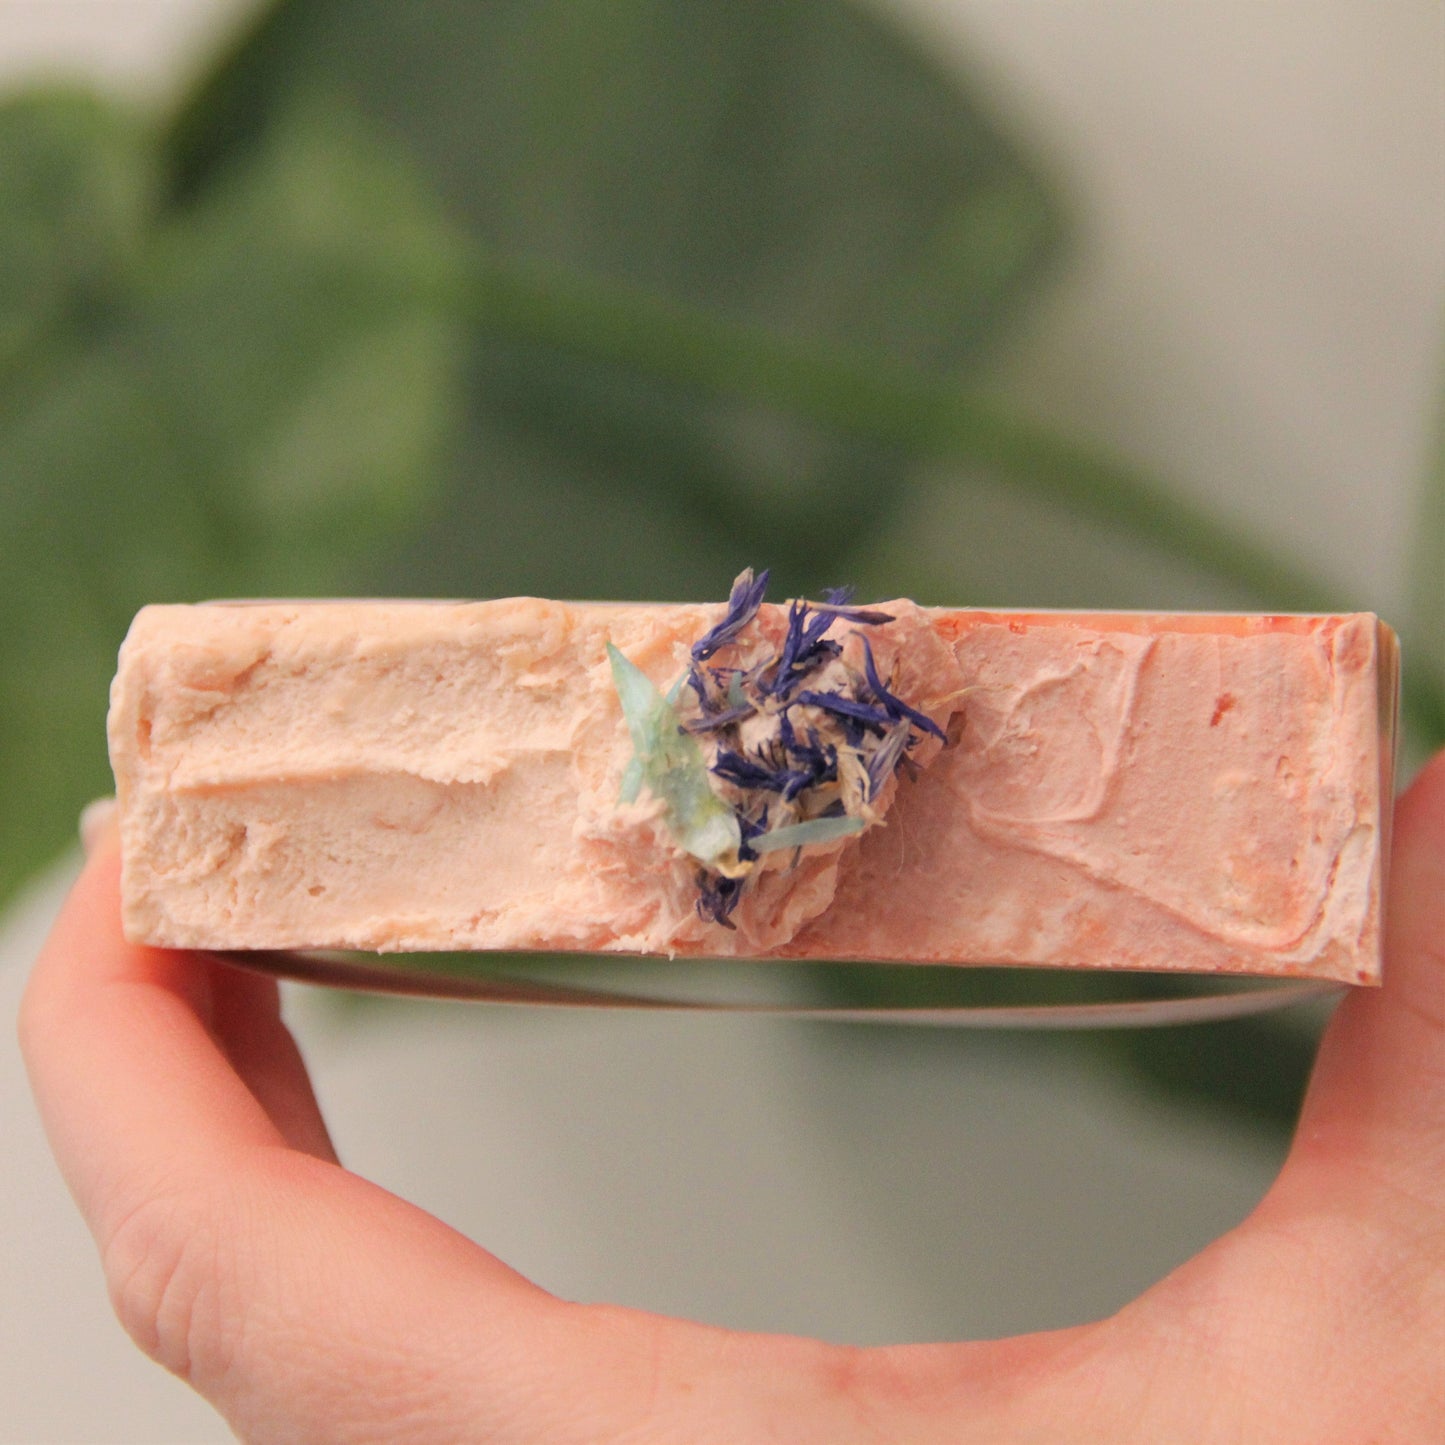 Rose Soap Making Class Oct 21st 2:00pm